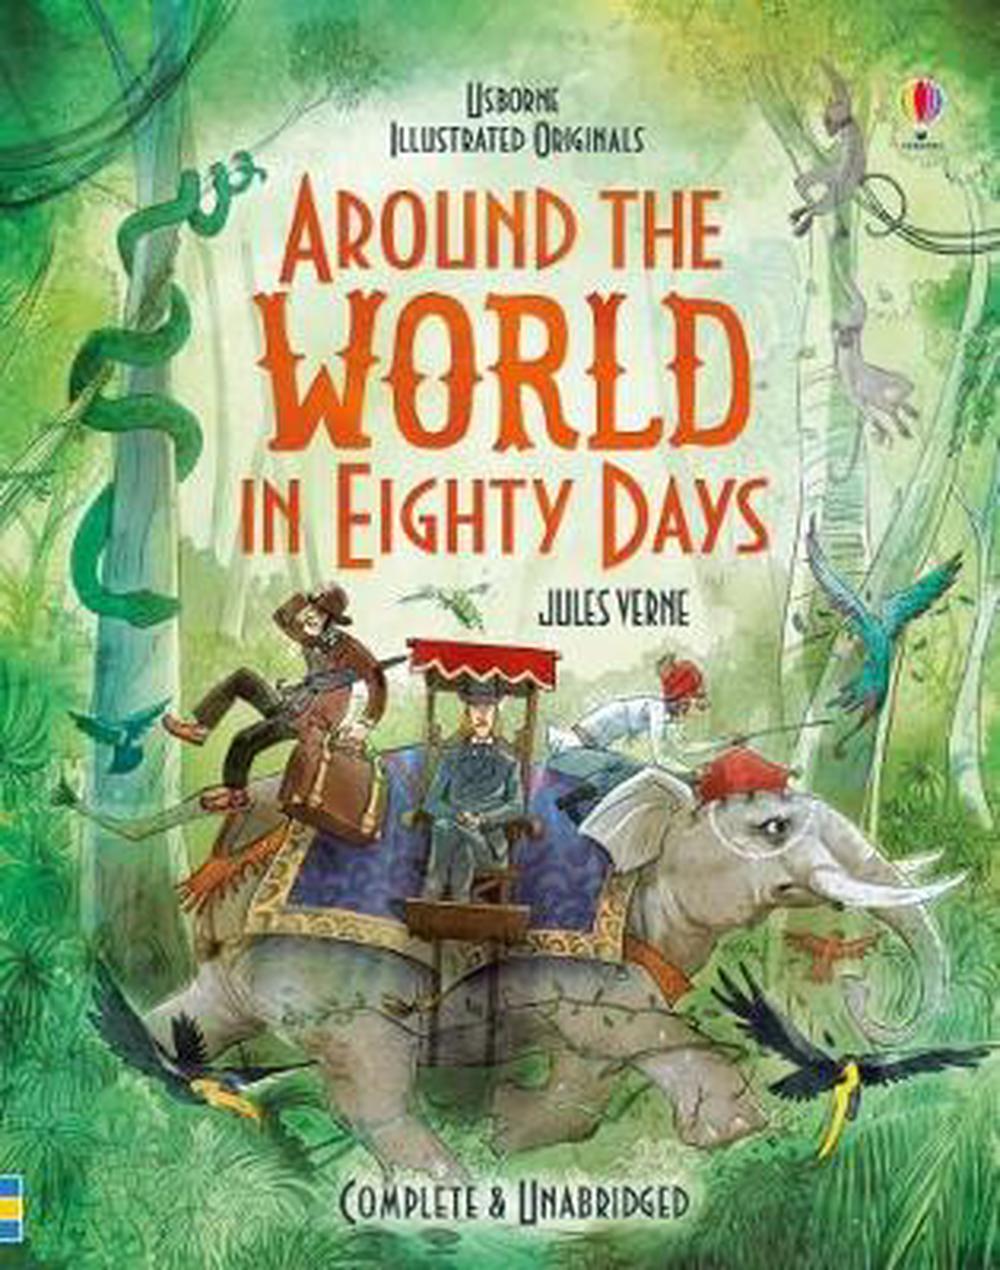 around the world in 80 days book review summary